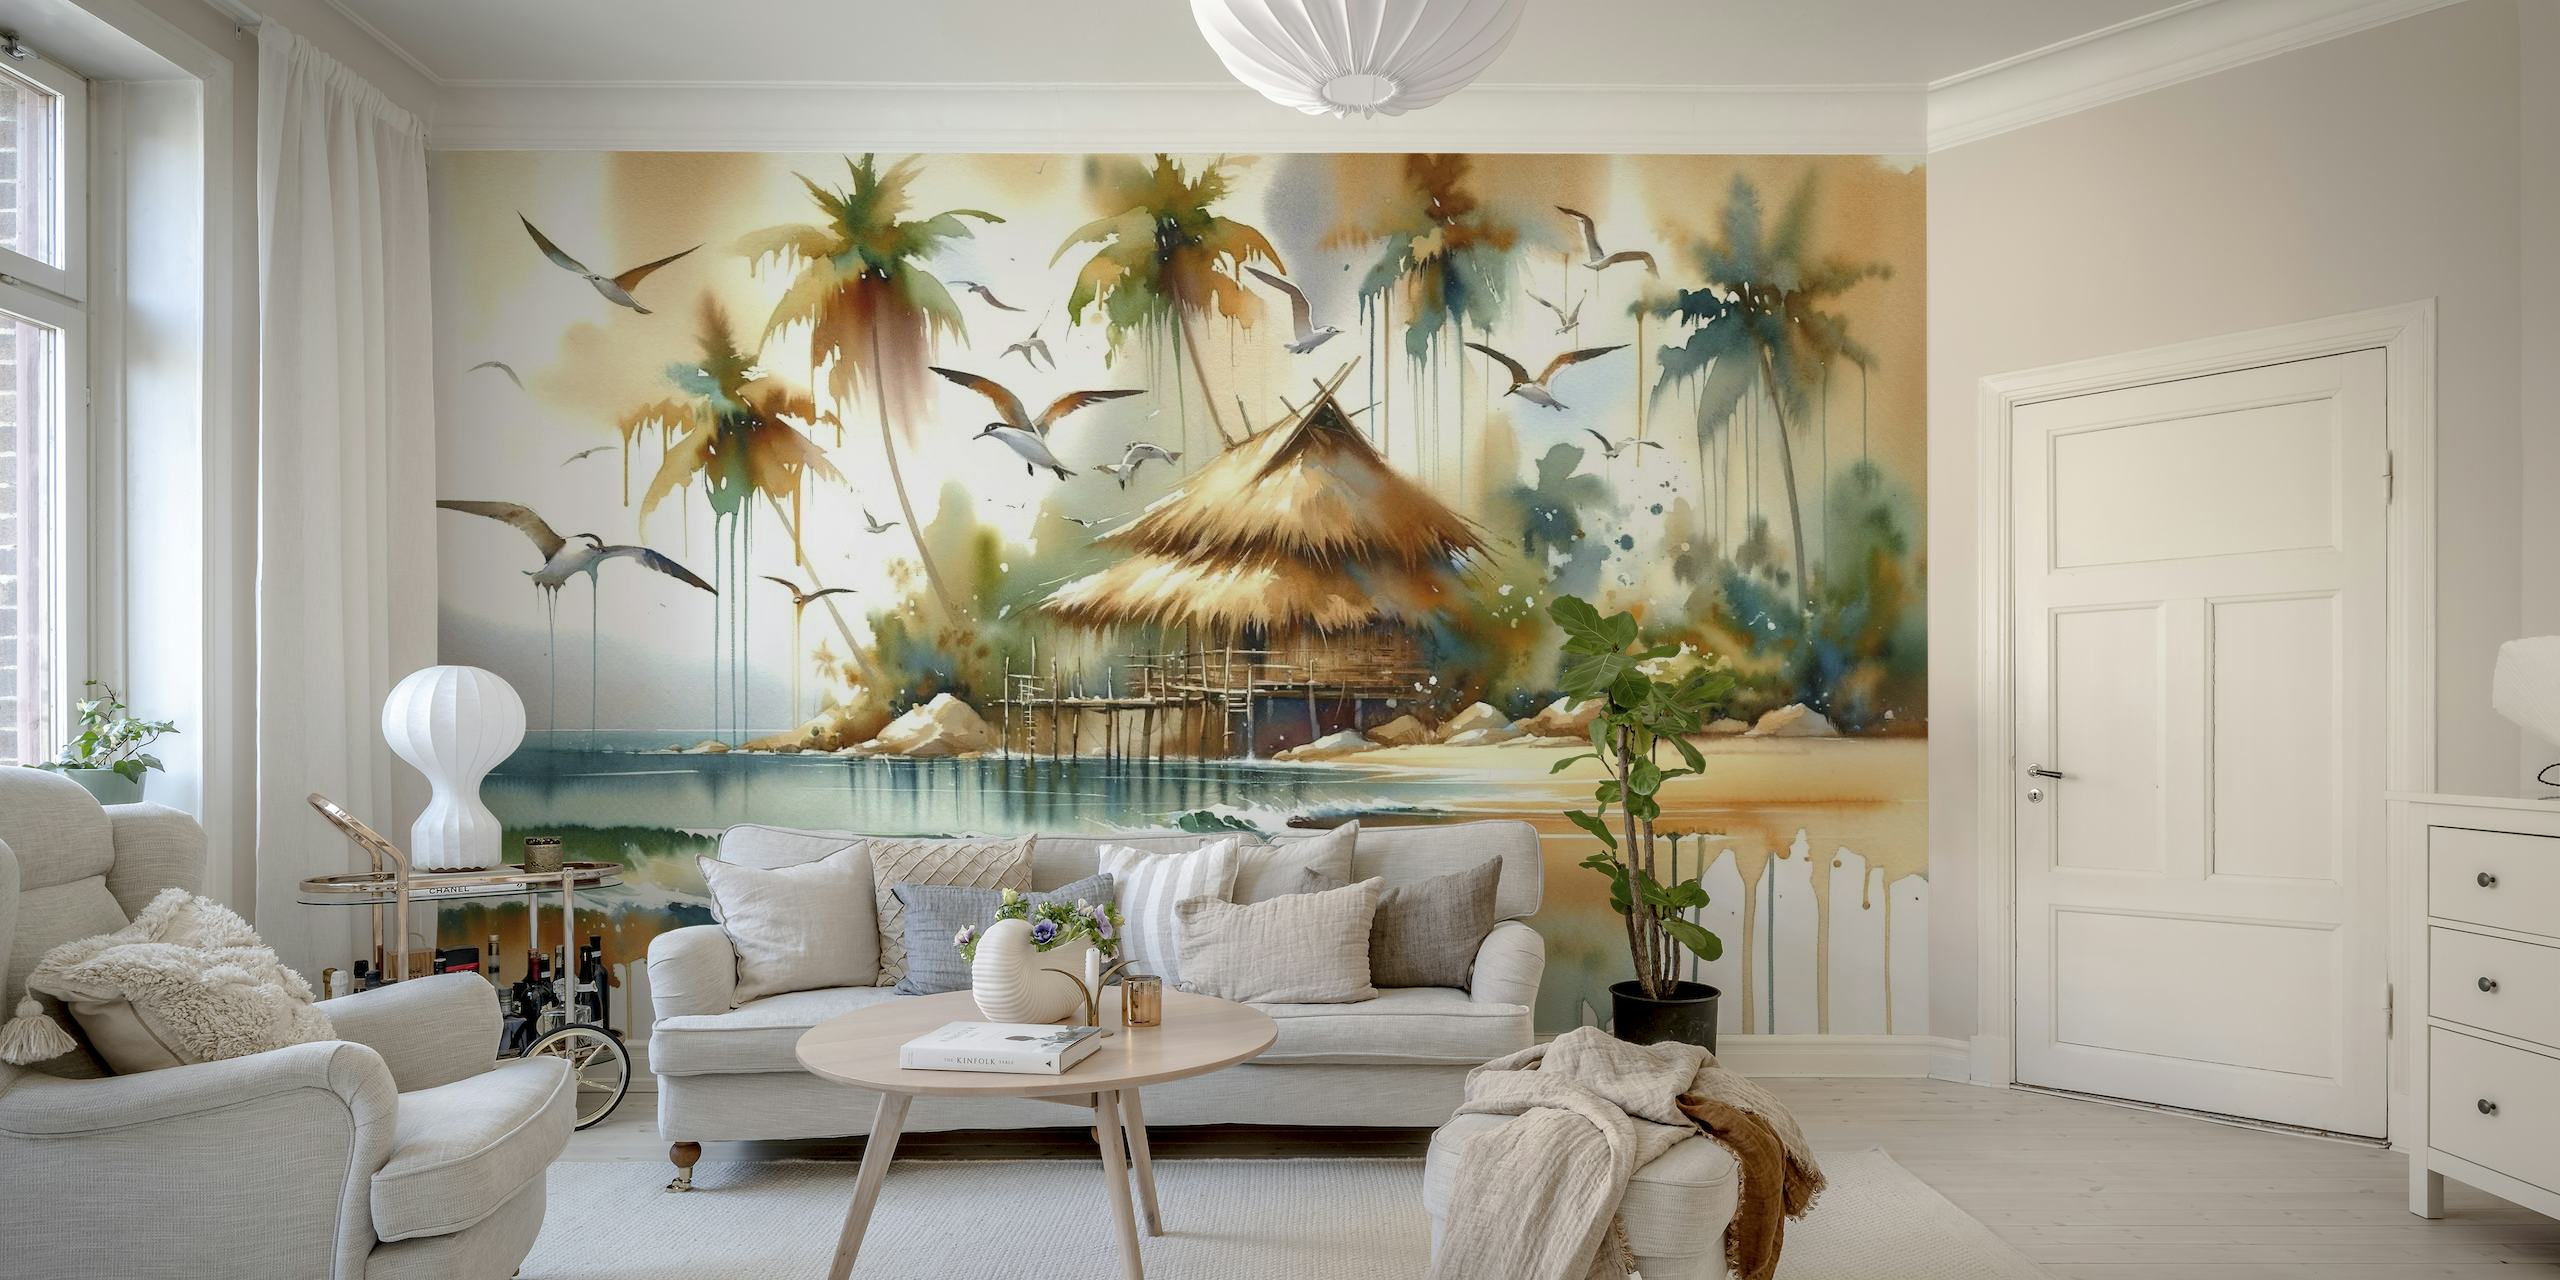 Abstract watercolor wall mural depicting a serene island scene with palm trees, a thatched hut, and gentle waves.